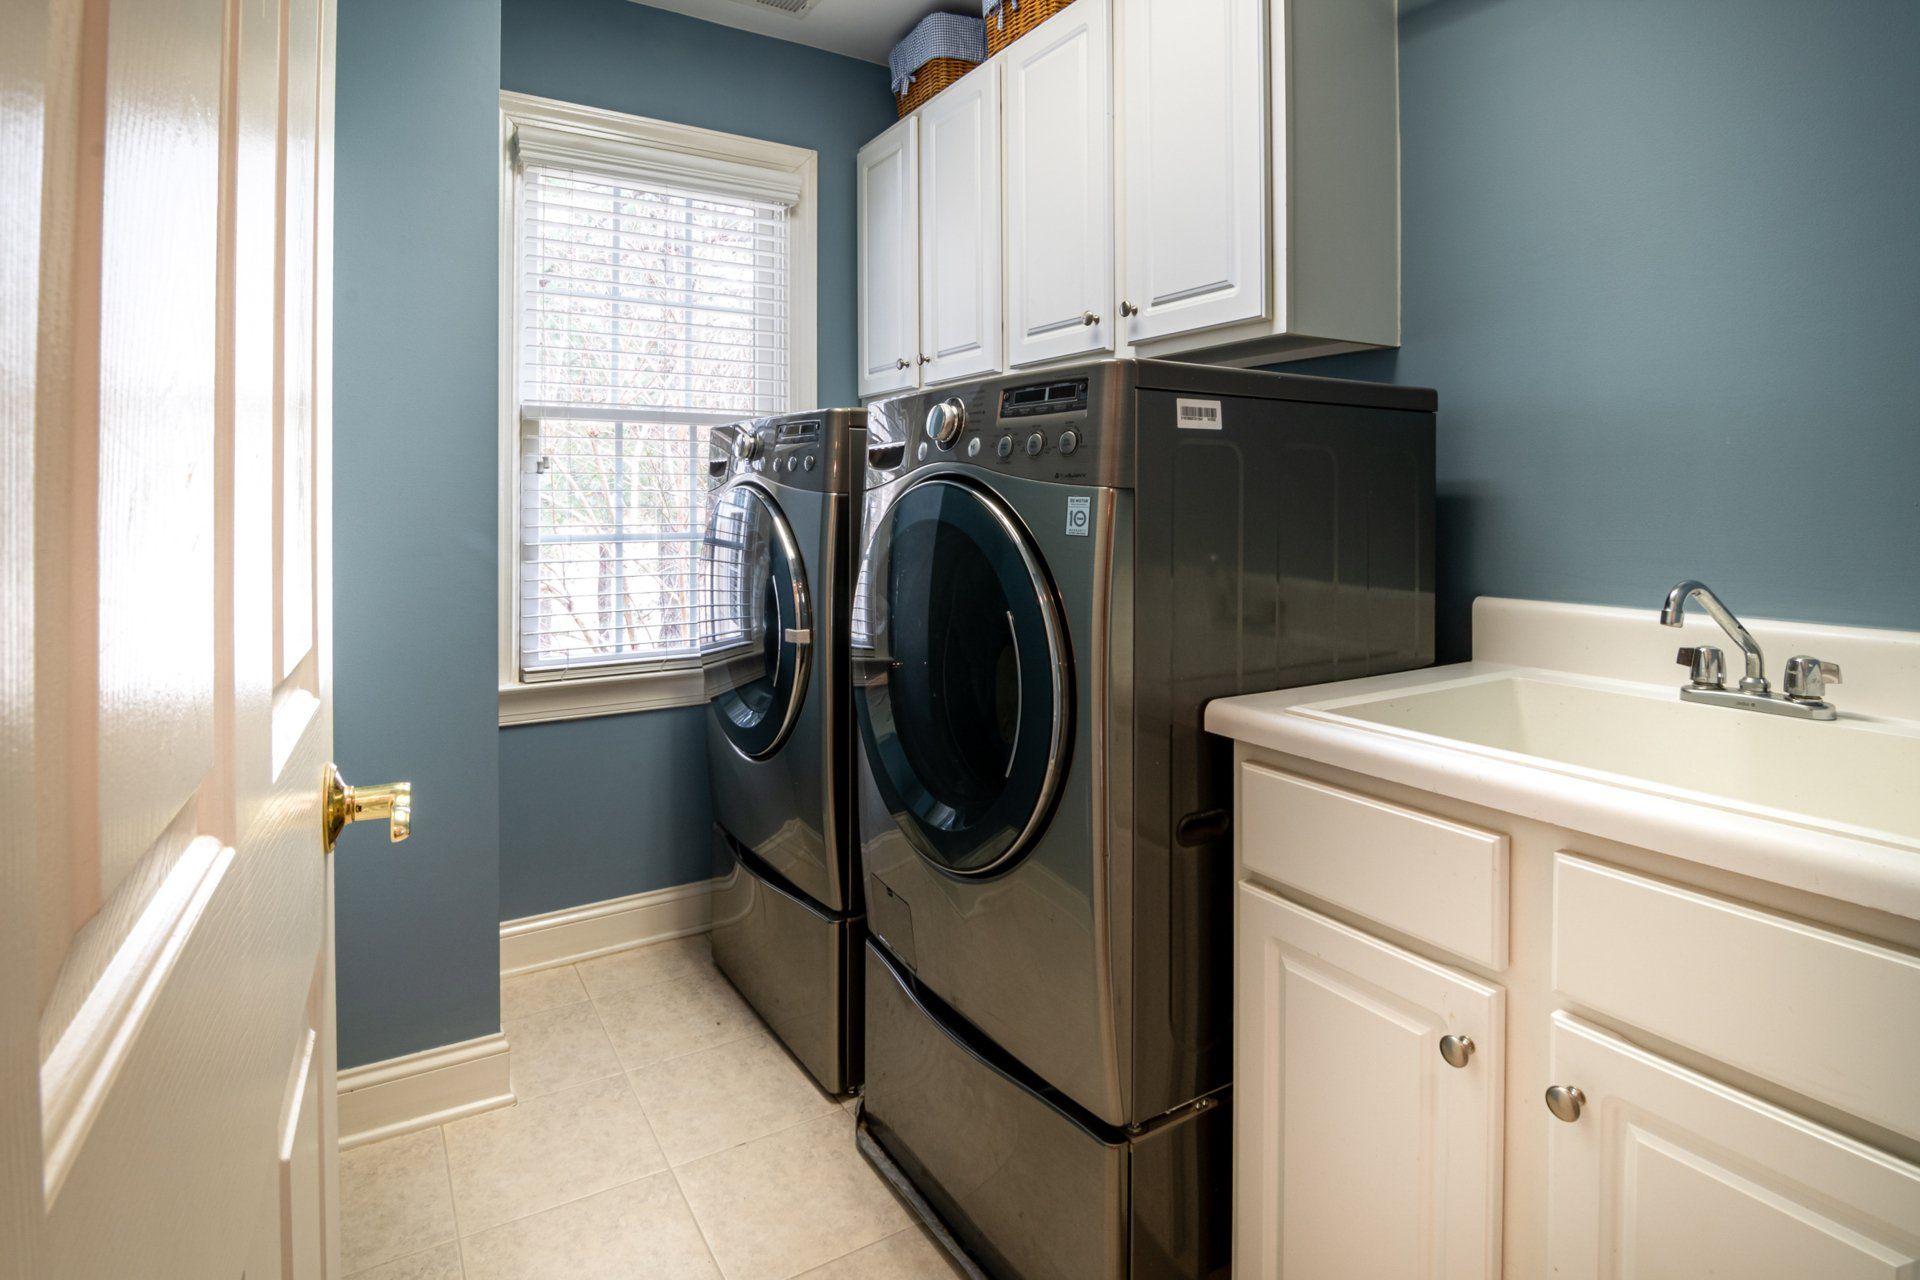 Washing Machine in a small and neat laundry room.